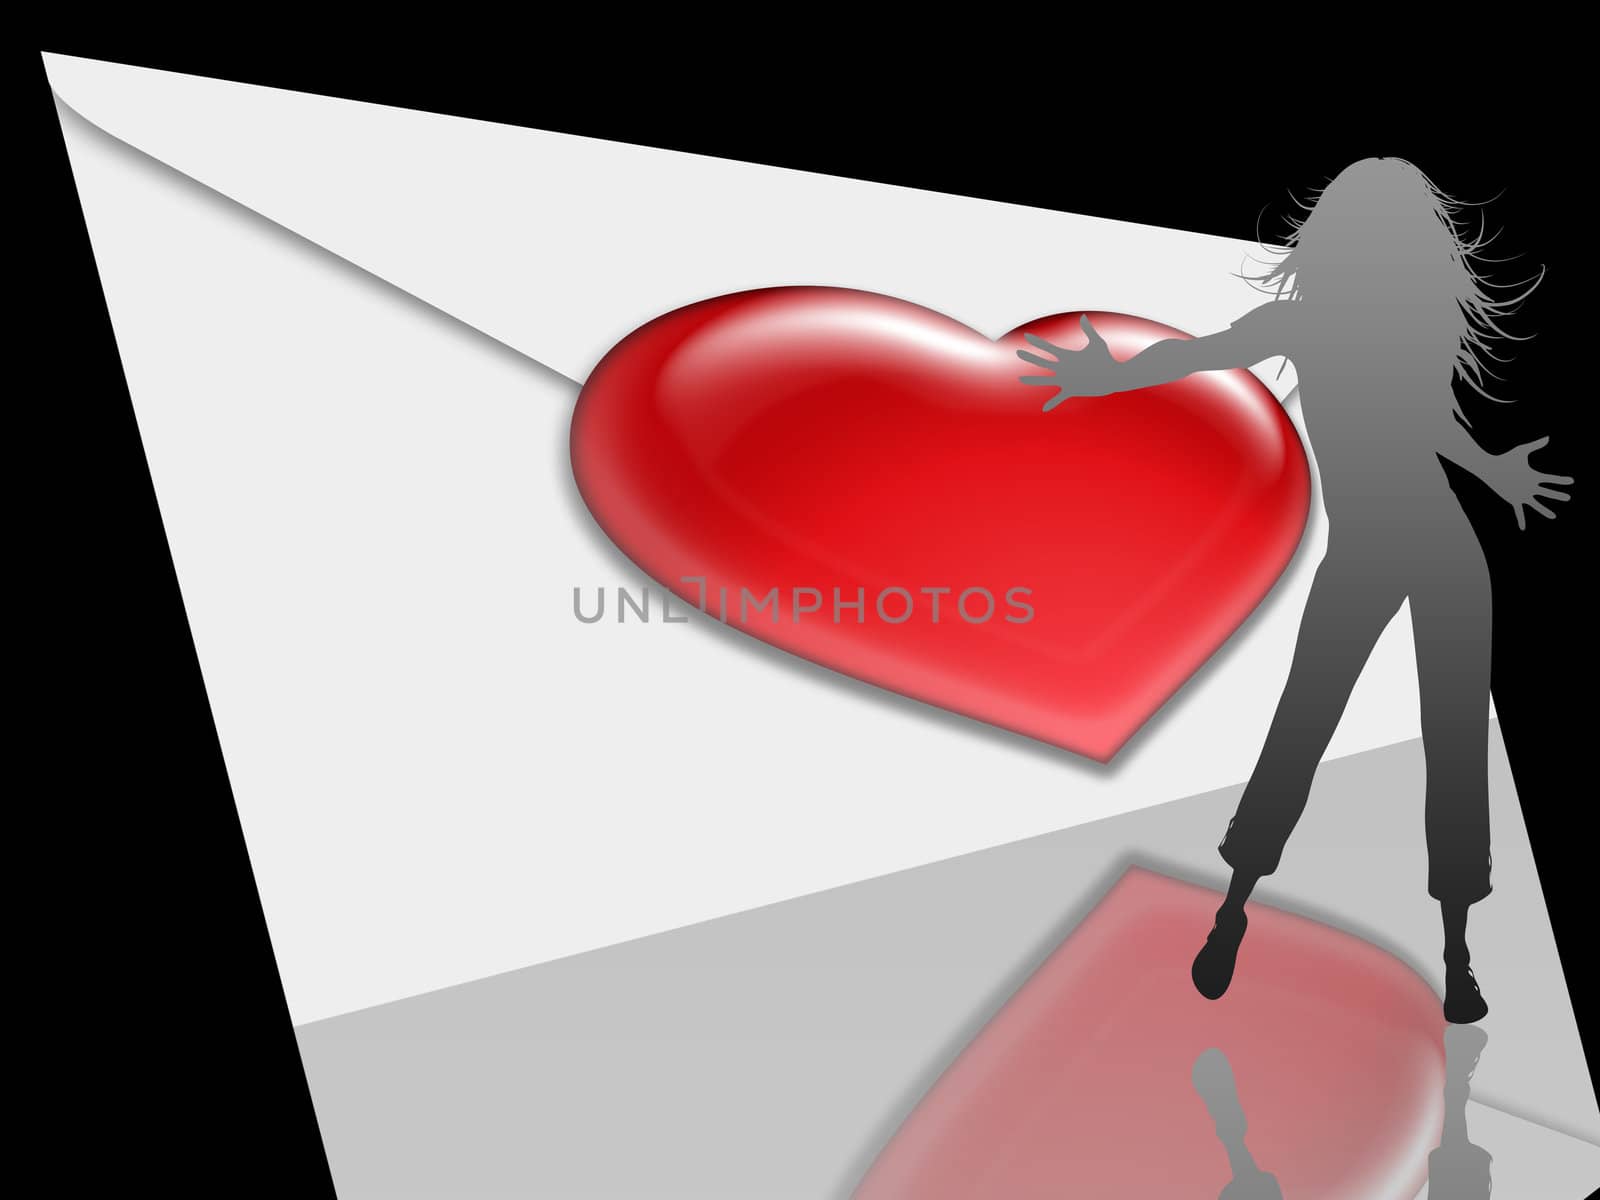 postcard or background with heart on the envelope and silhouette of woman
